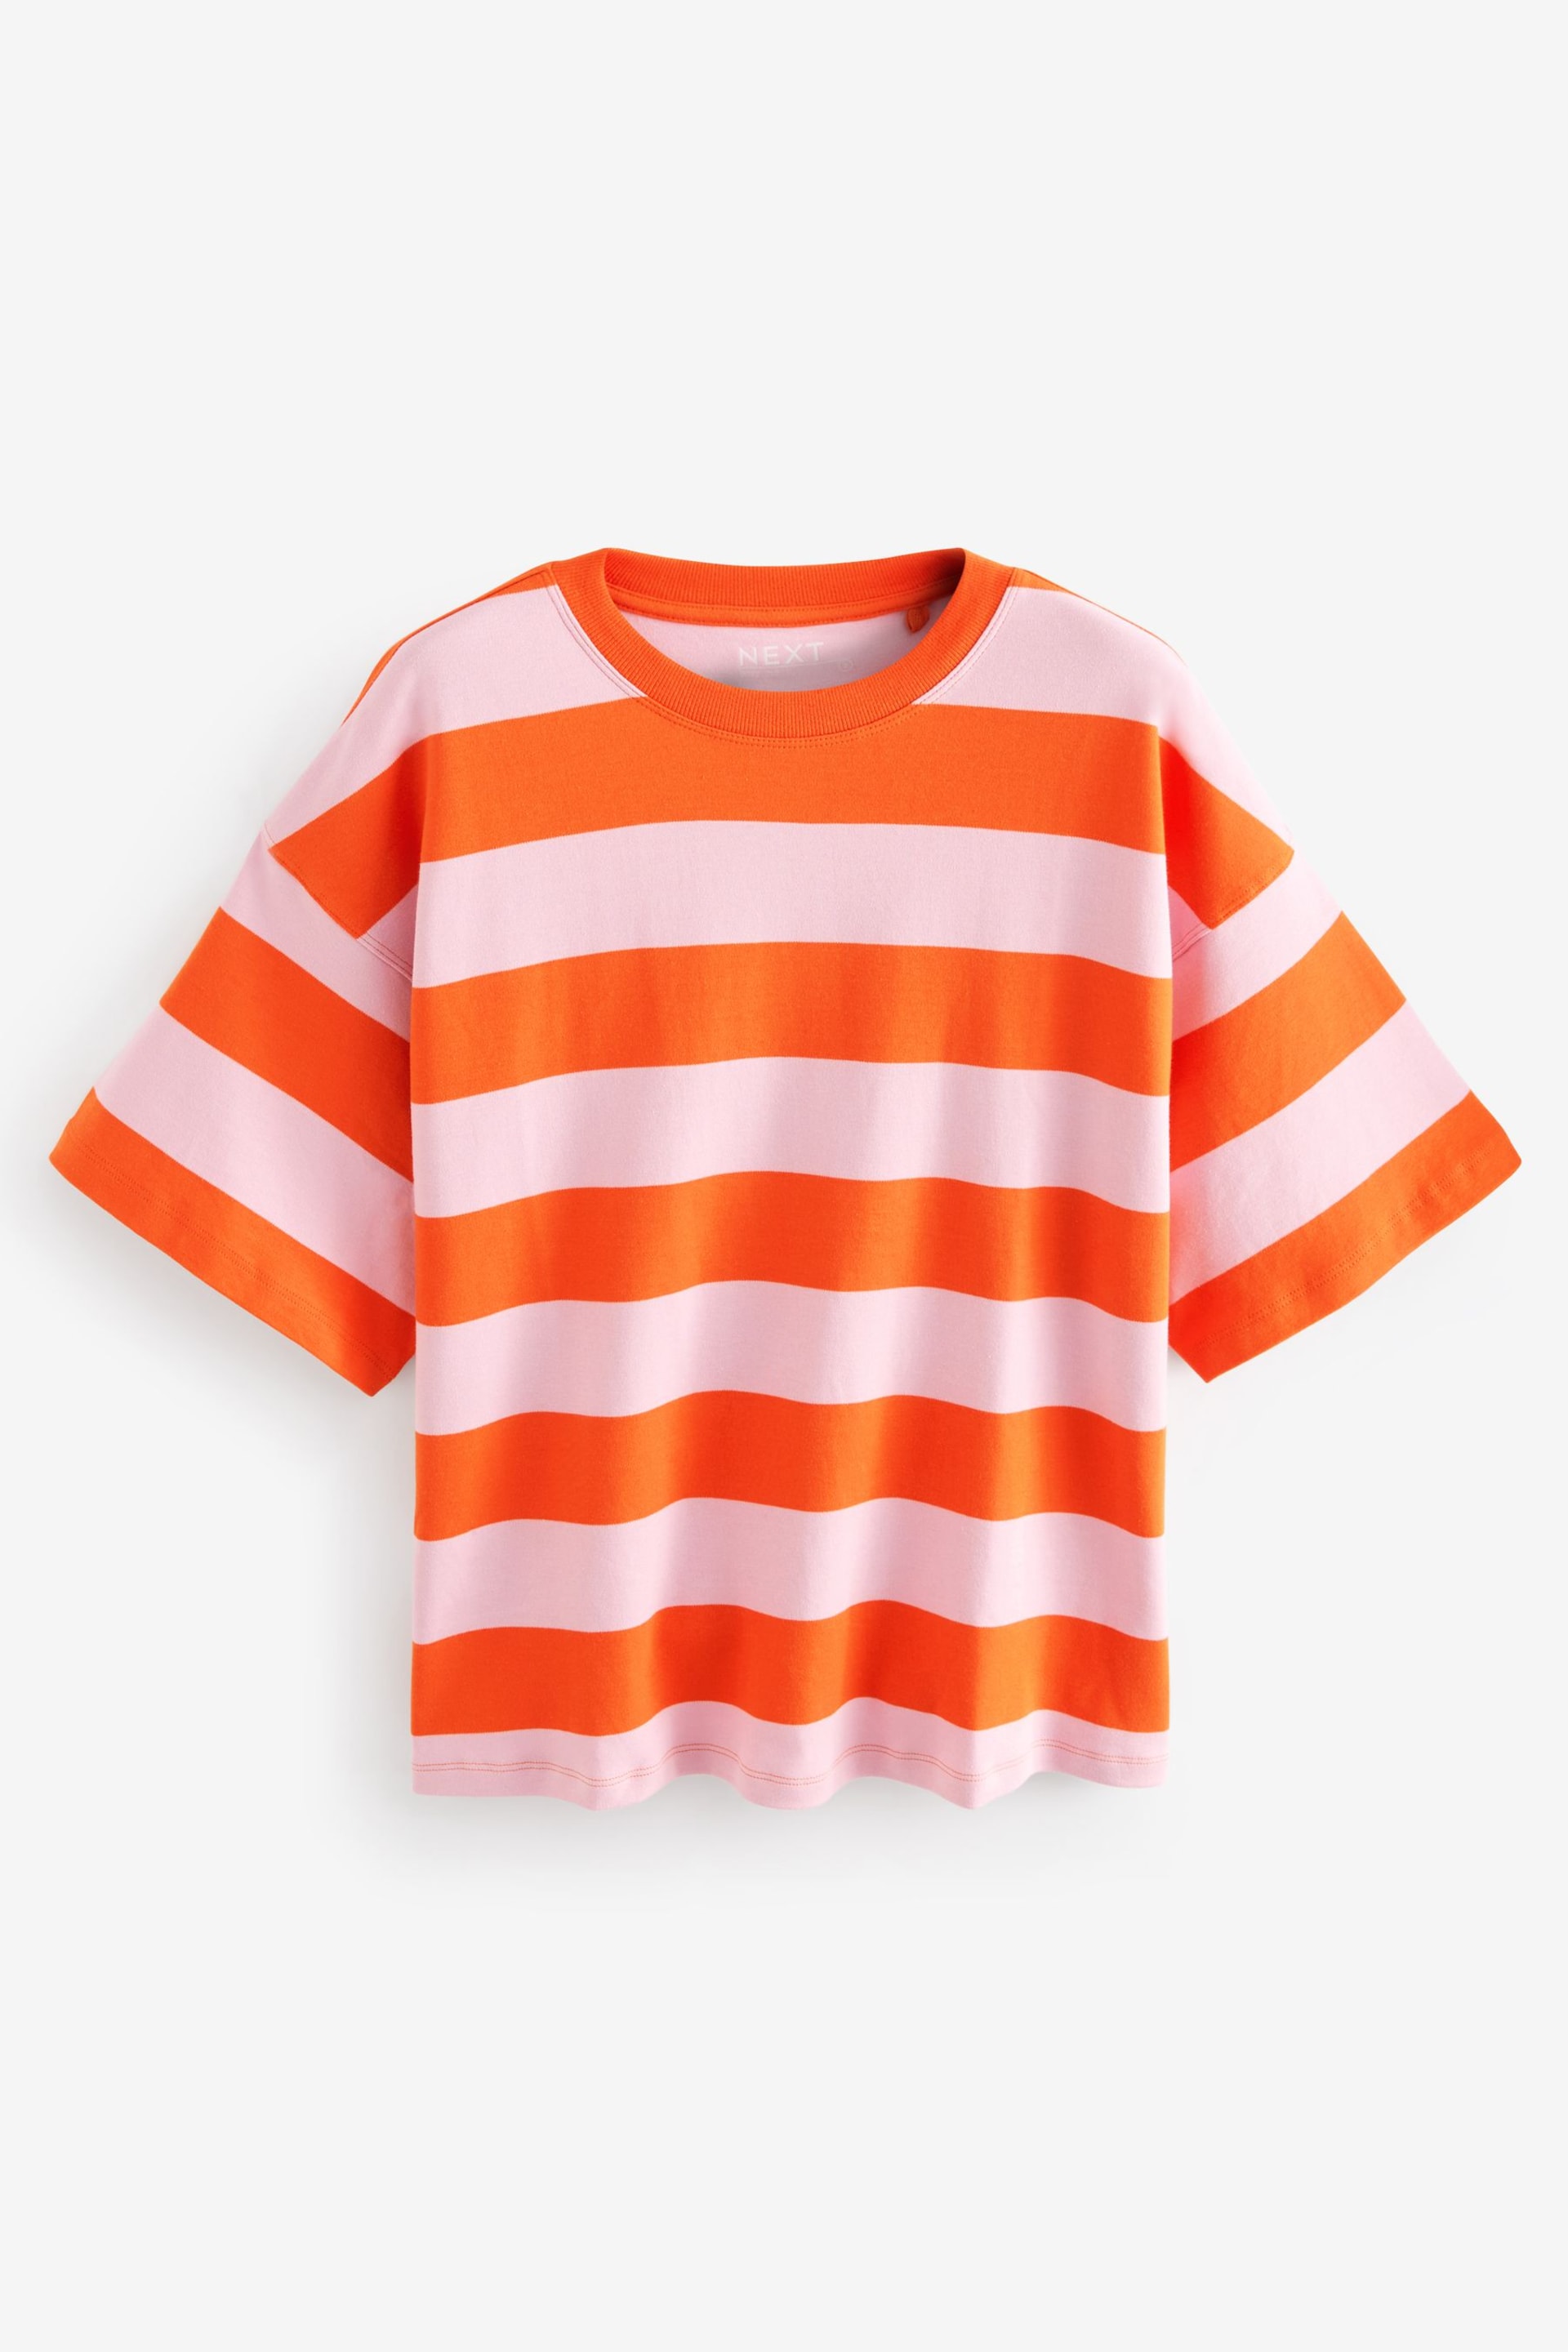 Orange/Pink 100% Cotton Heavyweight Relaxed Fit Crew Neck T-Shirt - Image 5 of 6